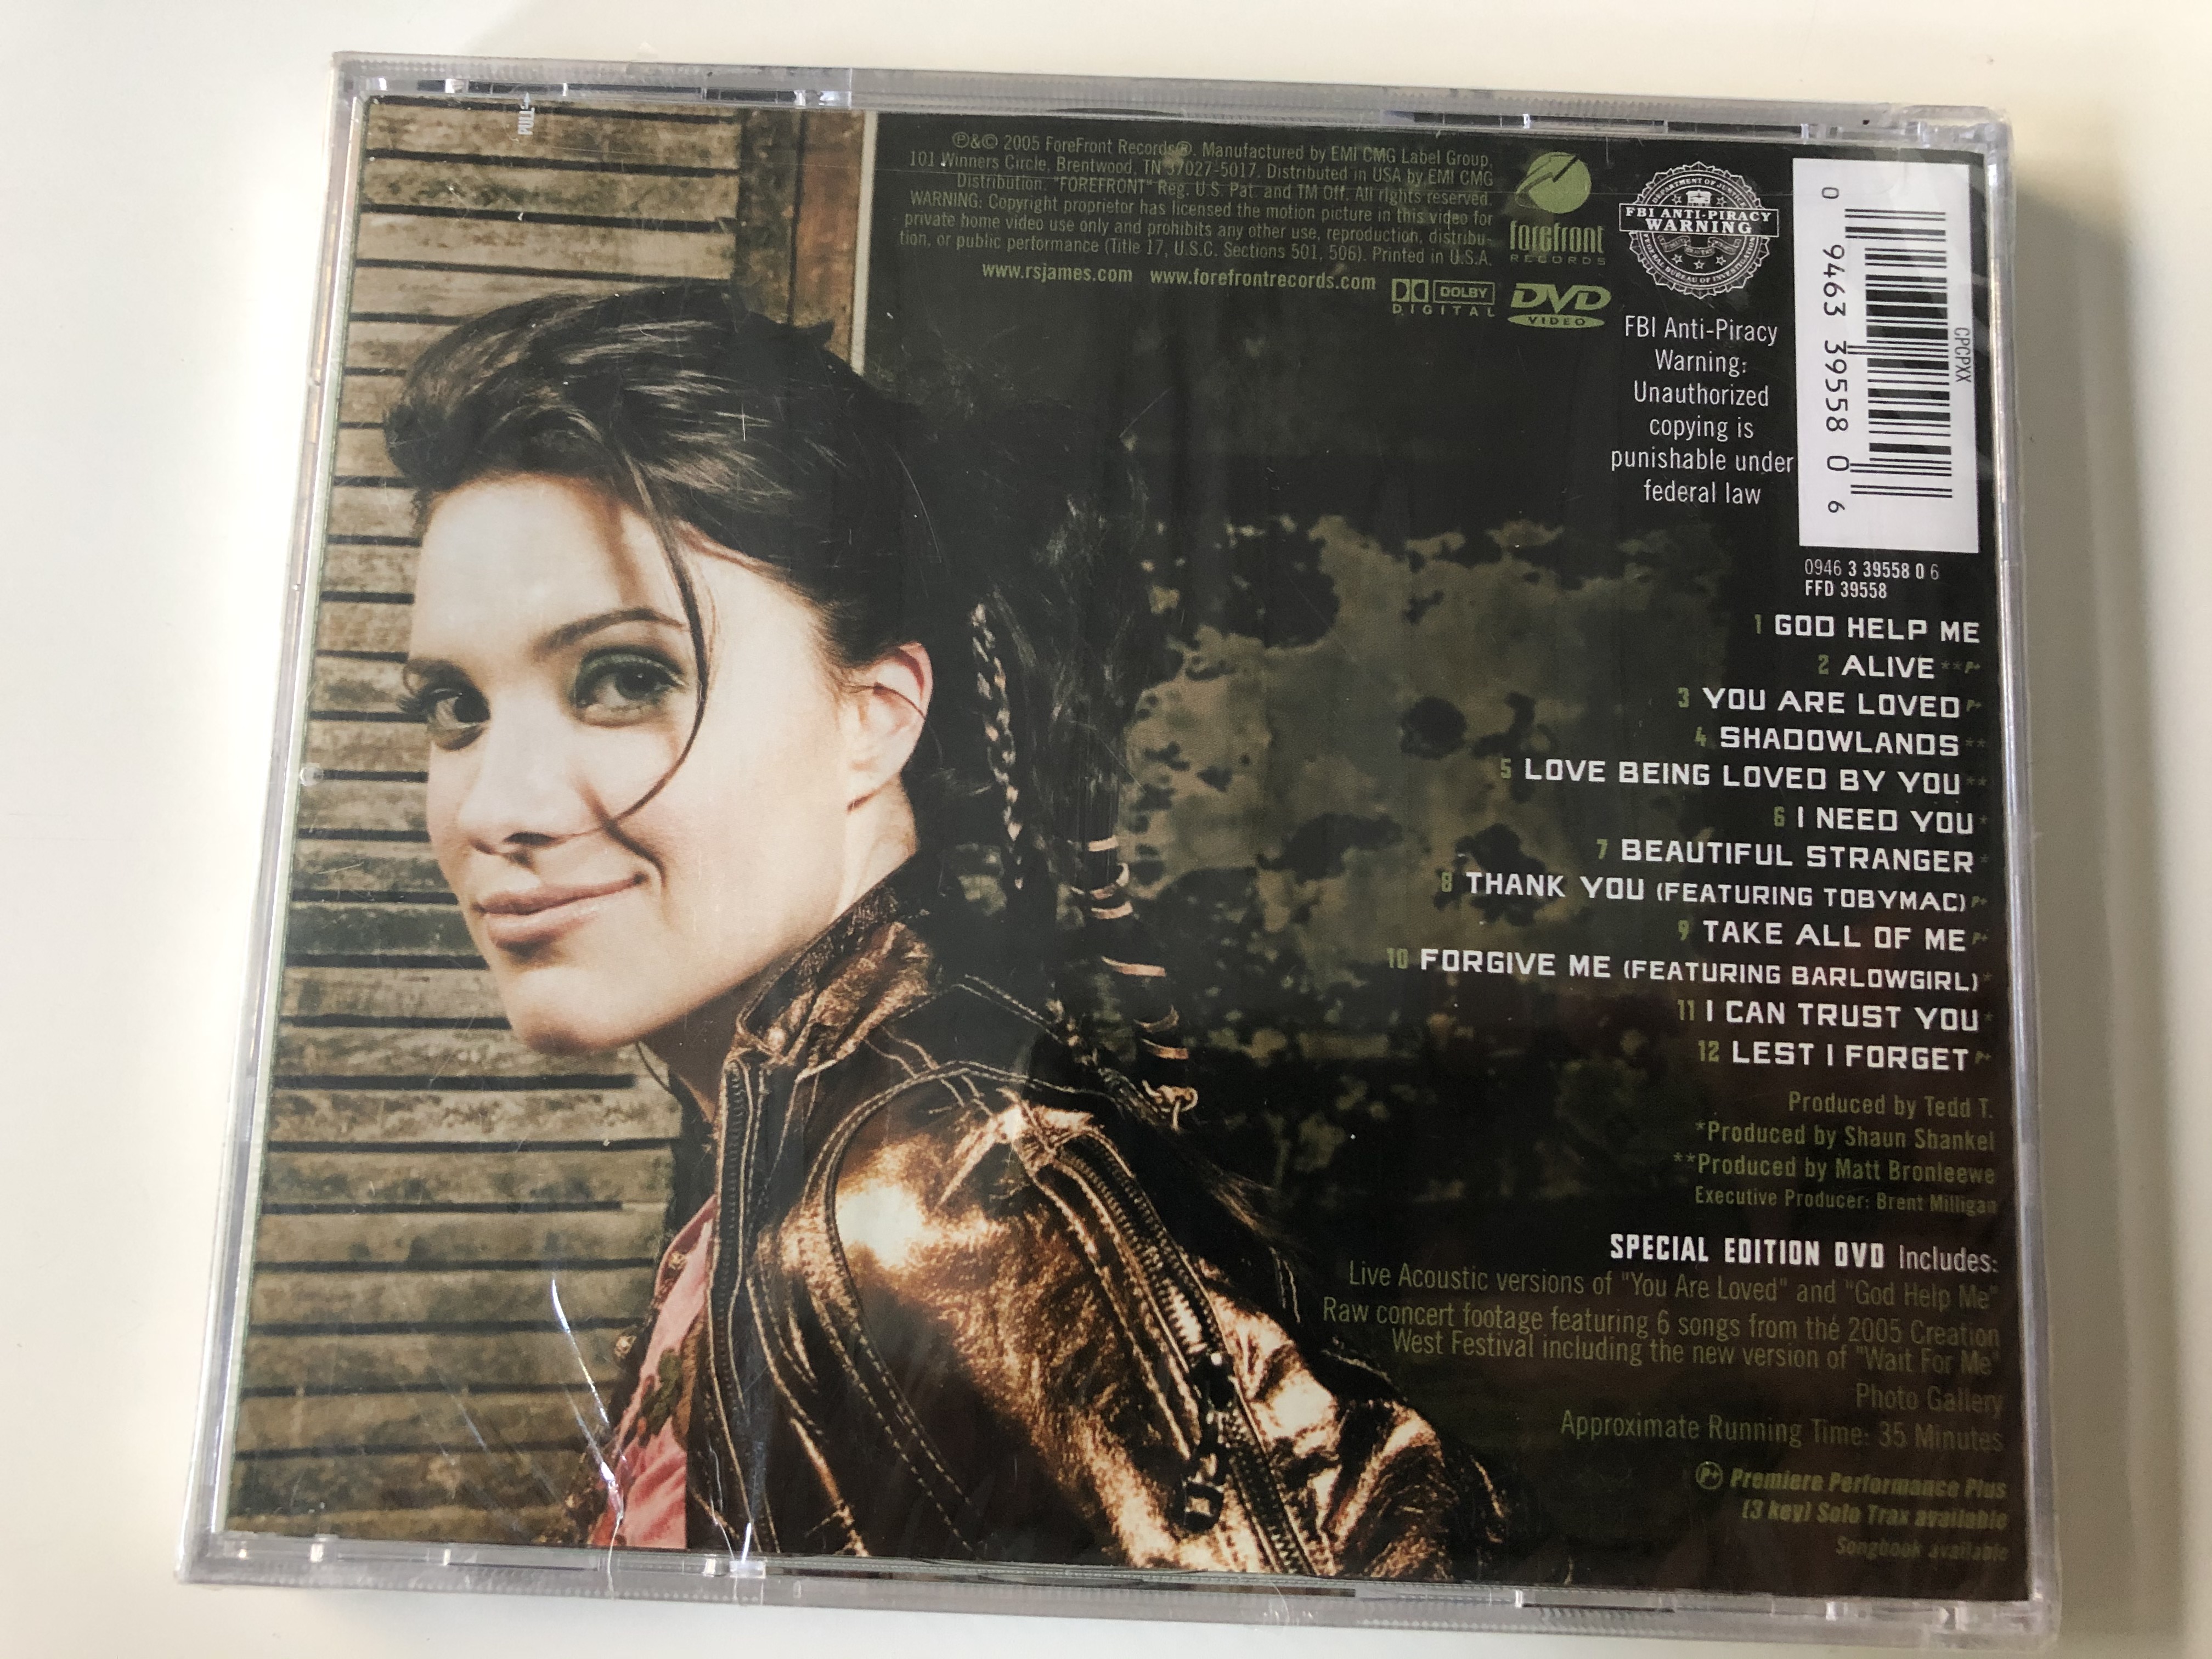 rebecca-st.-james-if-i-had-one-chance-to-tell-you-something-special-edition-forefront-records-audio-cd-dvd-2005-ffd-39558-3-.jpg